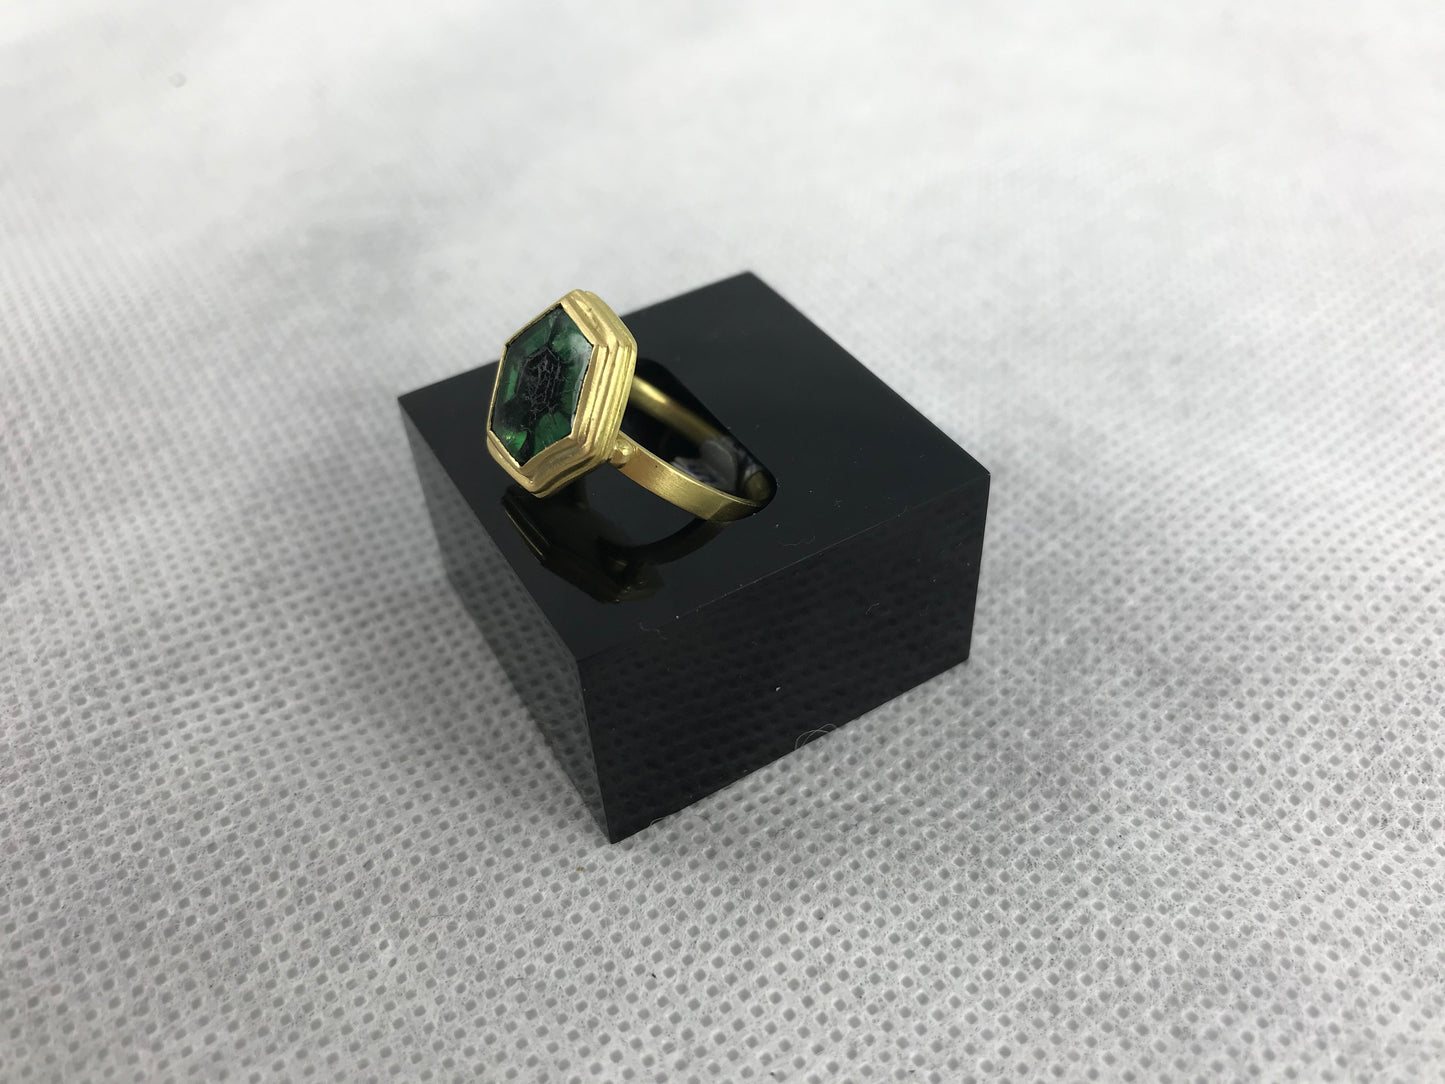 Scott-Moncrieff, Jean: Gold and emerald ring